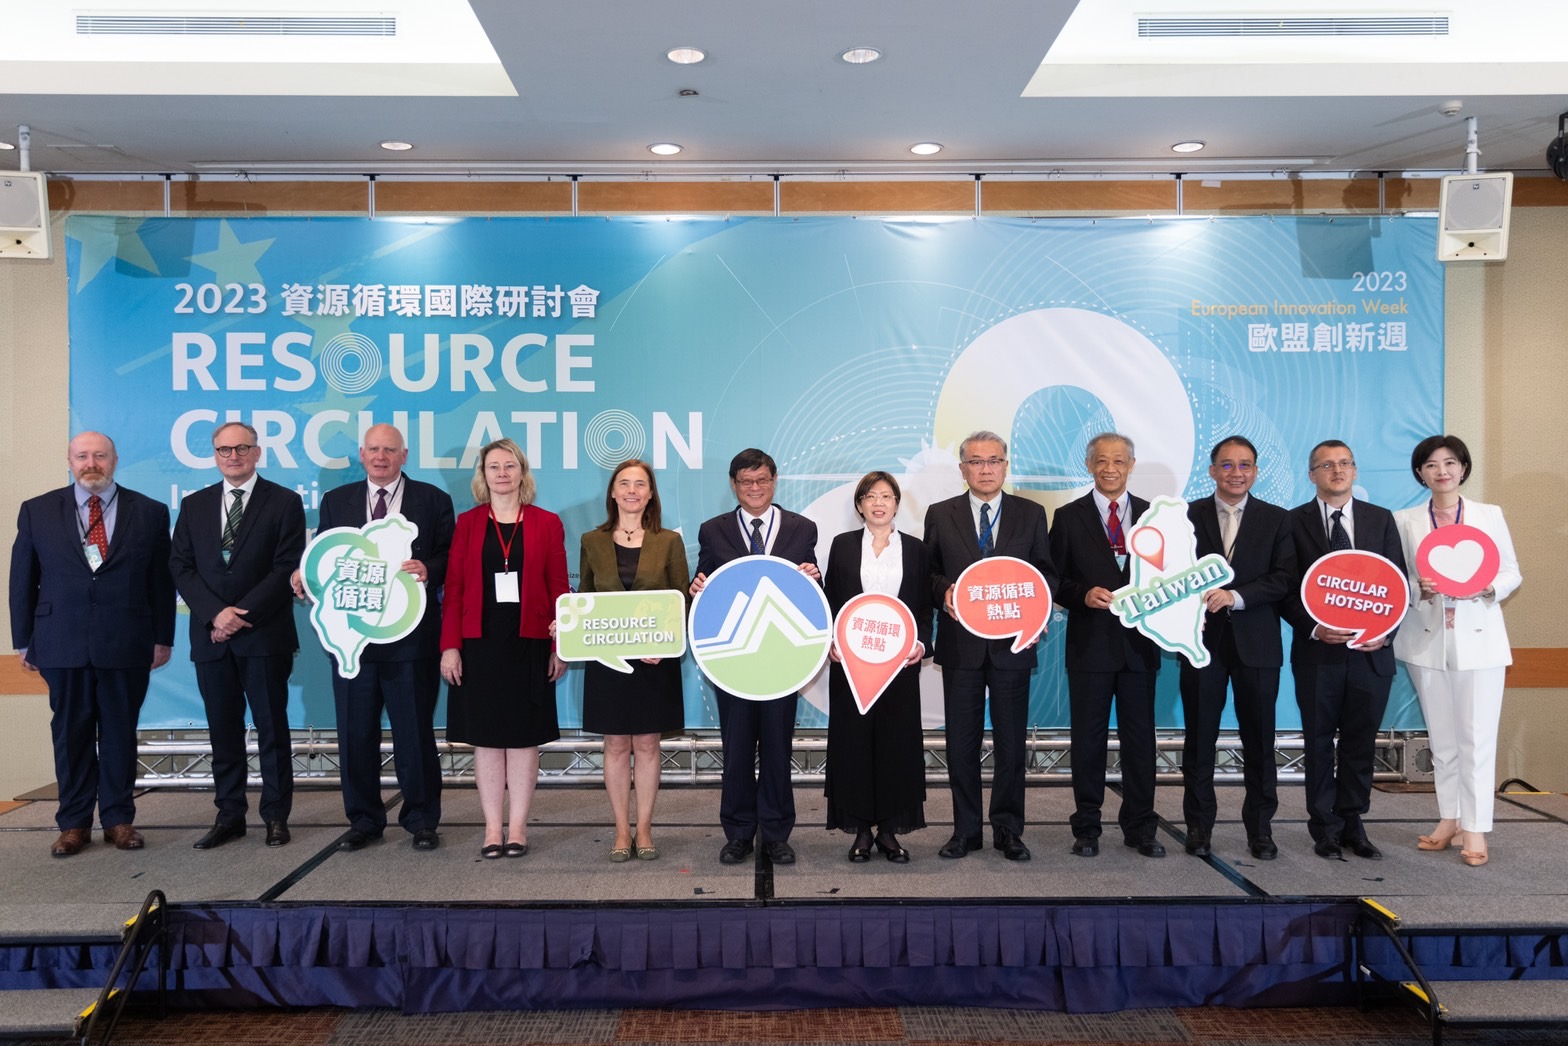 Speakers’ group photo for 2023 Resource Circulation International Conference